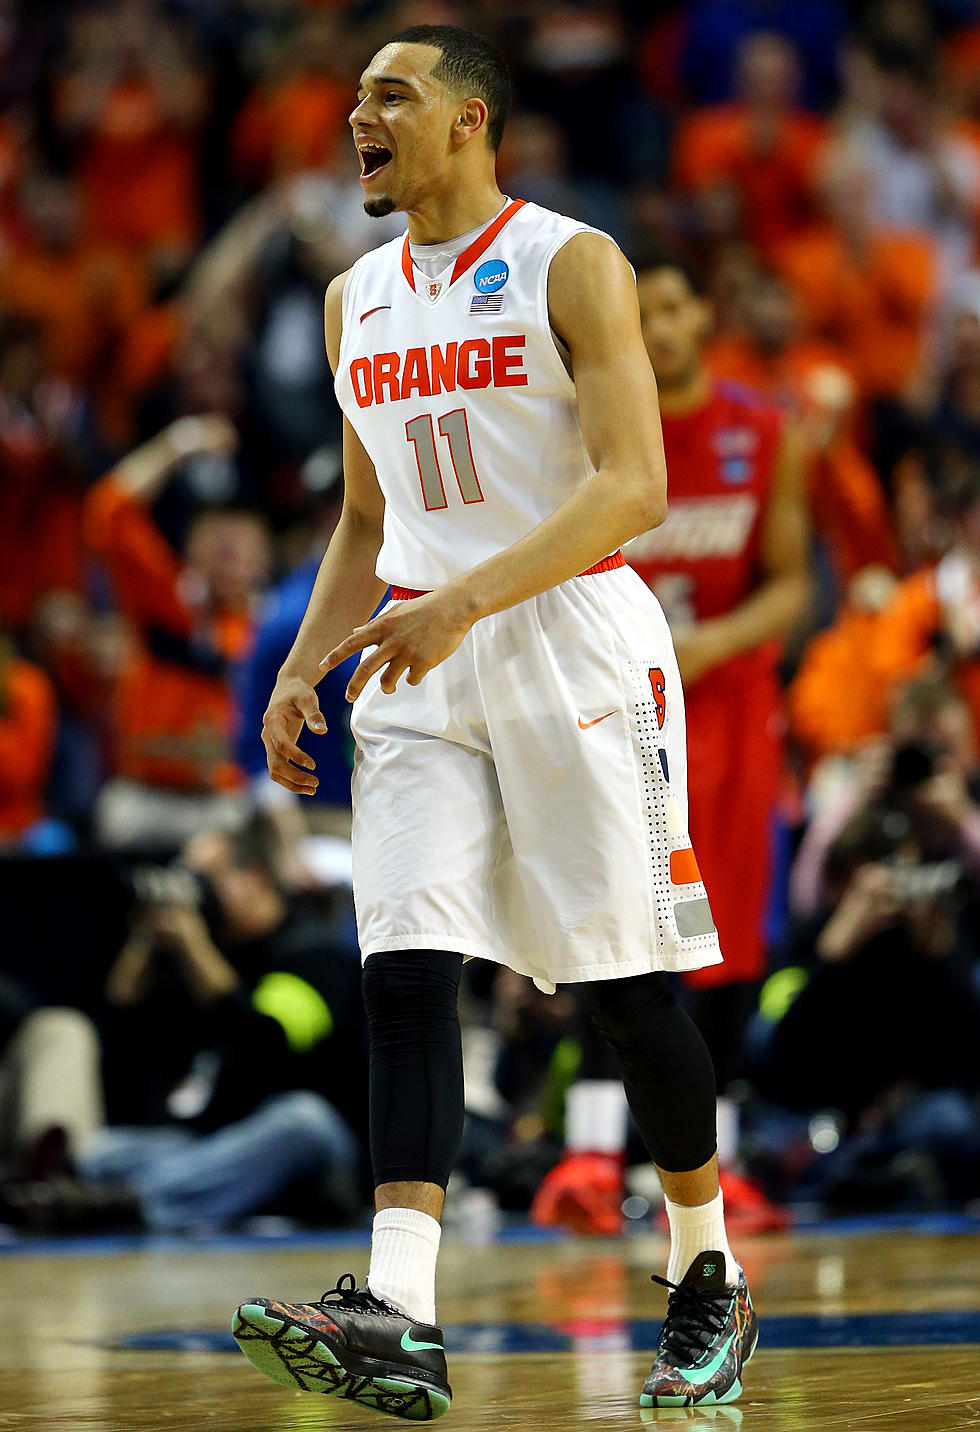 Doug’s Sports Rap: Syracuse Guard Tyler Ennis One and Done Headed for the 2014 NBA Draft [VIDEO]